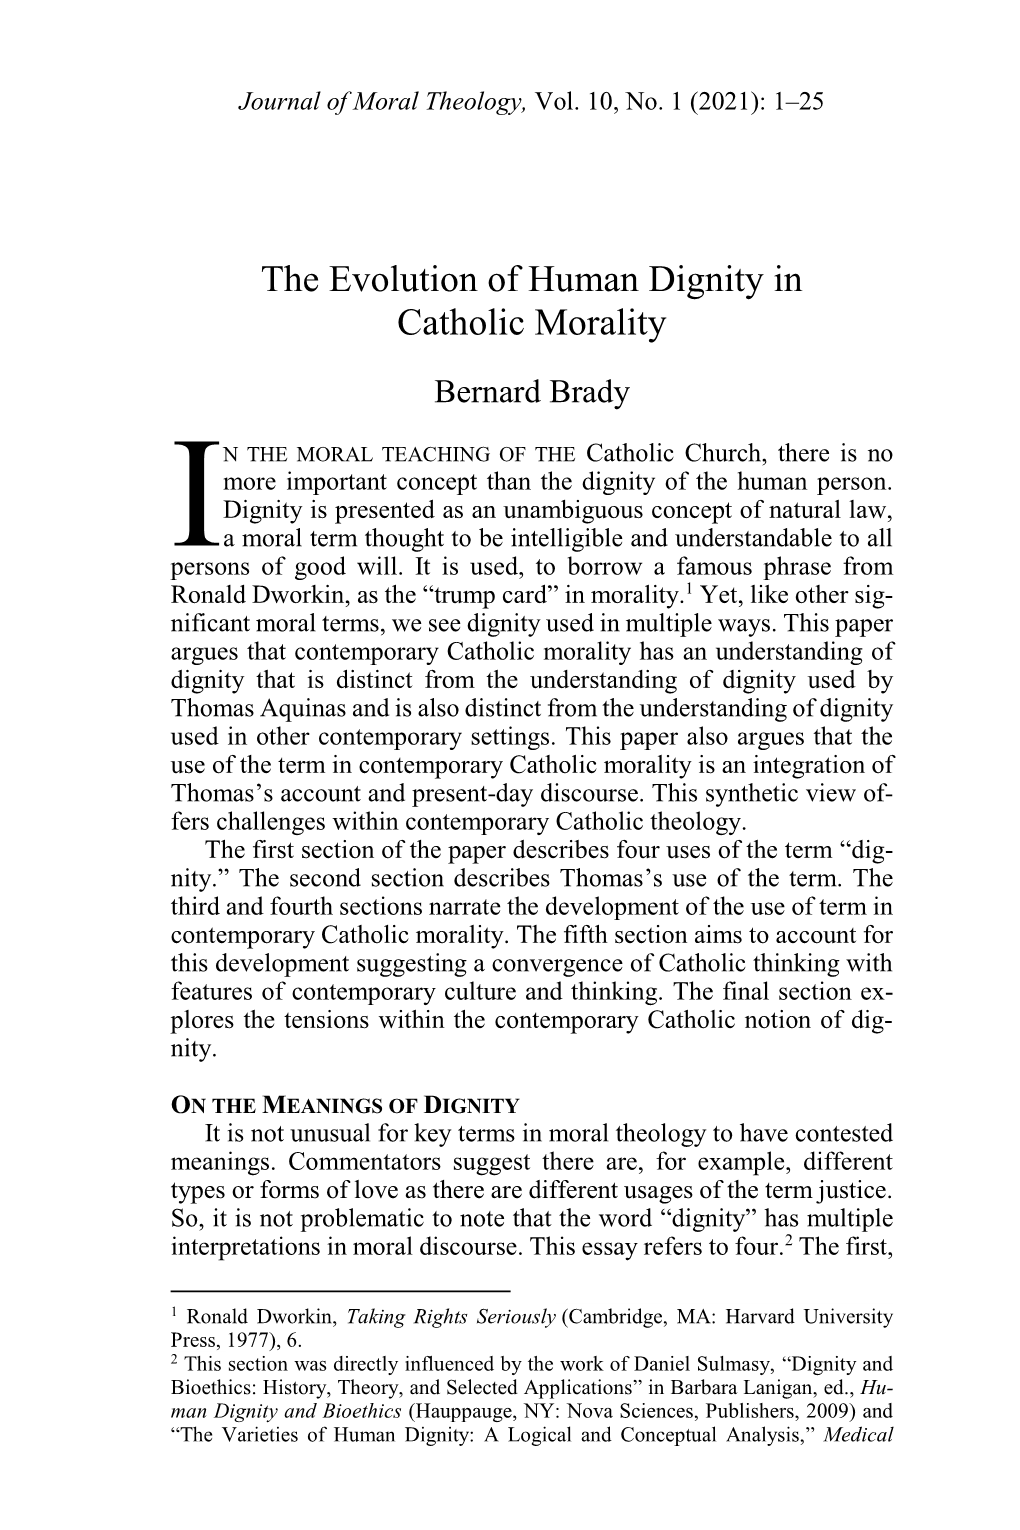 The Evolution of Human Dignity in Catholic Morality